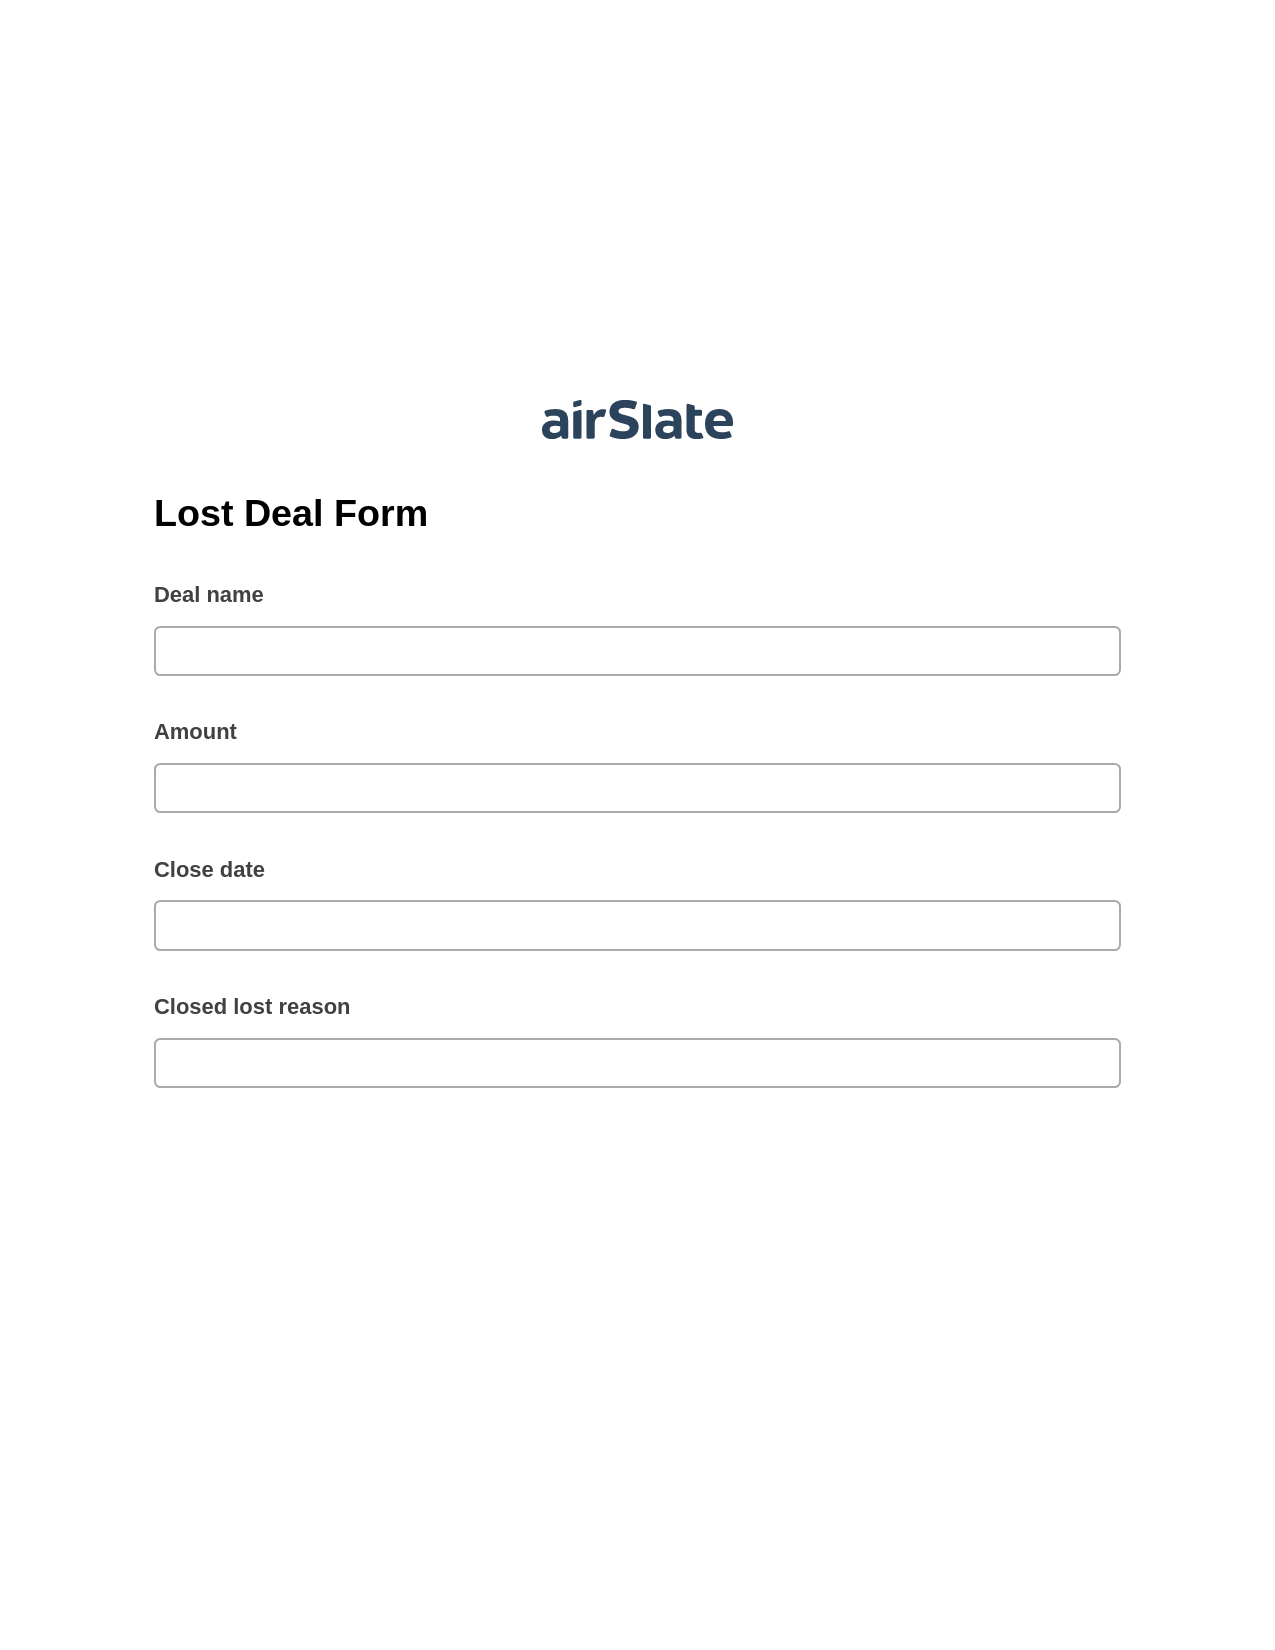 Lost Deal Form Pre-fill from Google Sheets Bot, Reminder Bot, Archive to Dropbox Bot